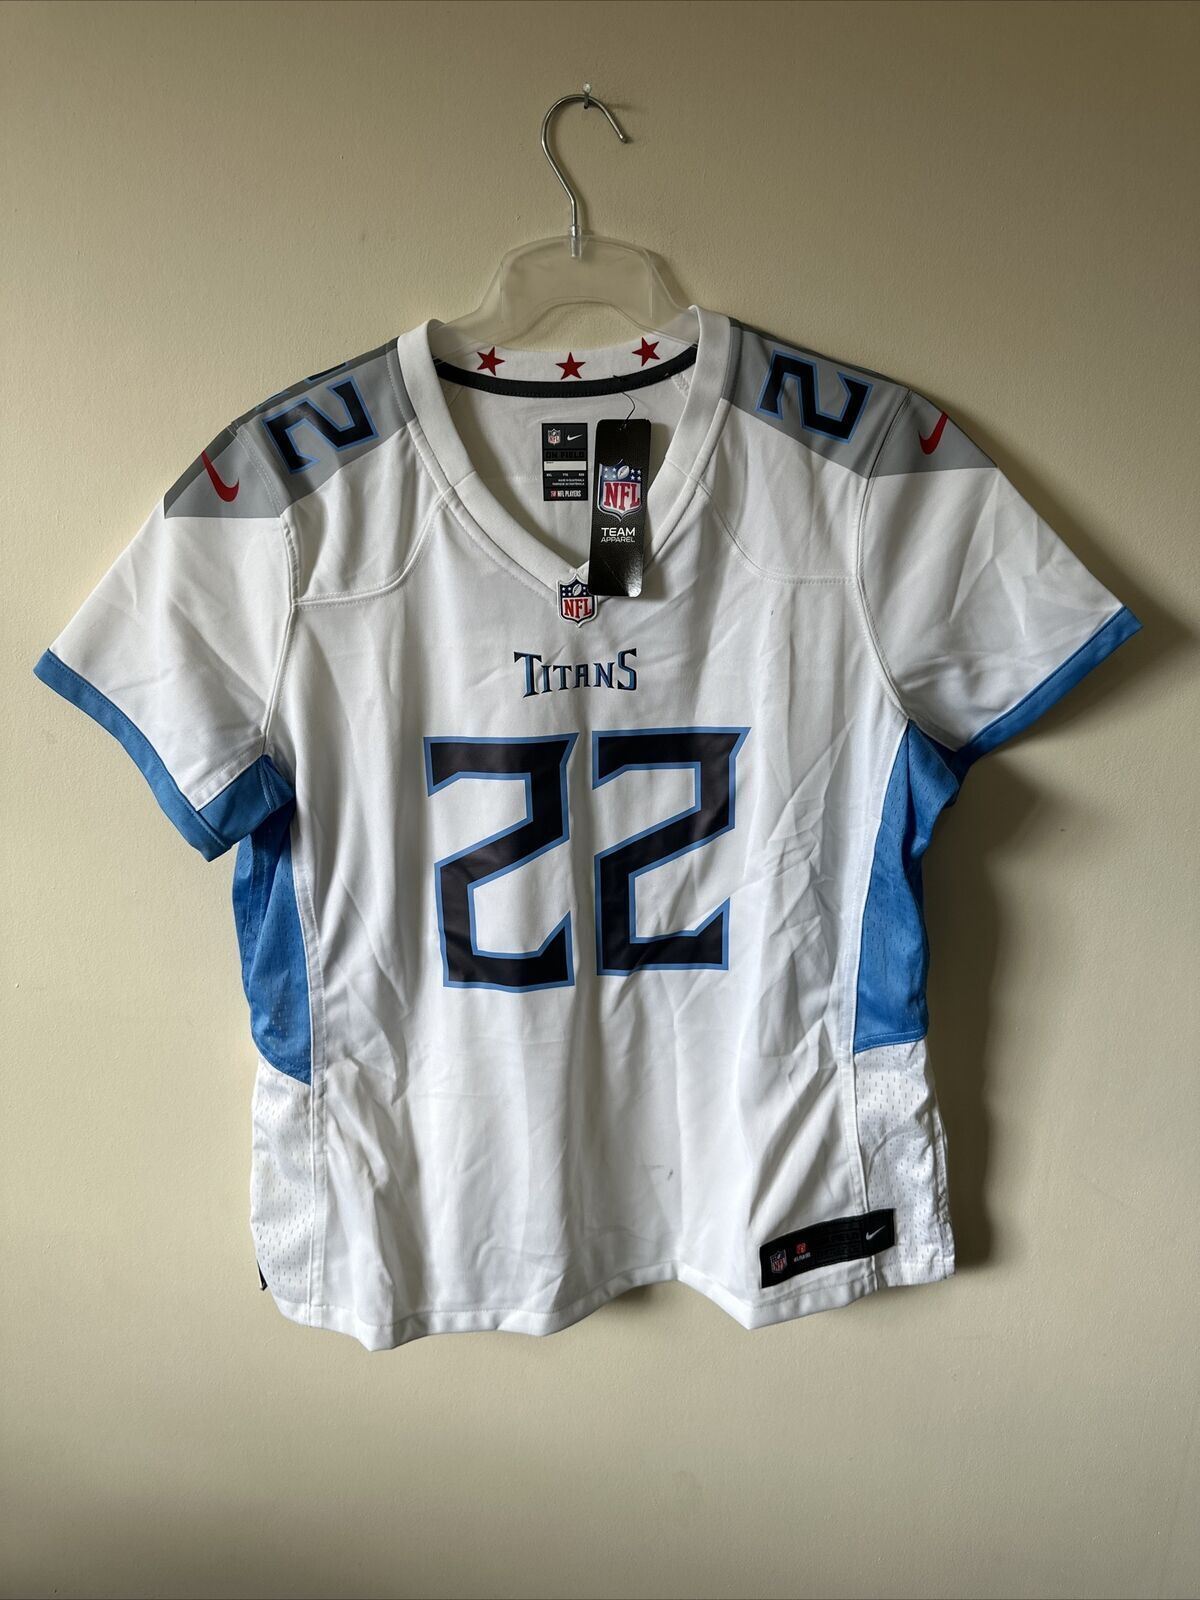 Nike NFL Tennesse Titans Road Game Jersey HENRY 22 Women’s Size 2XL